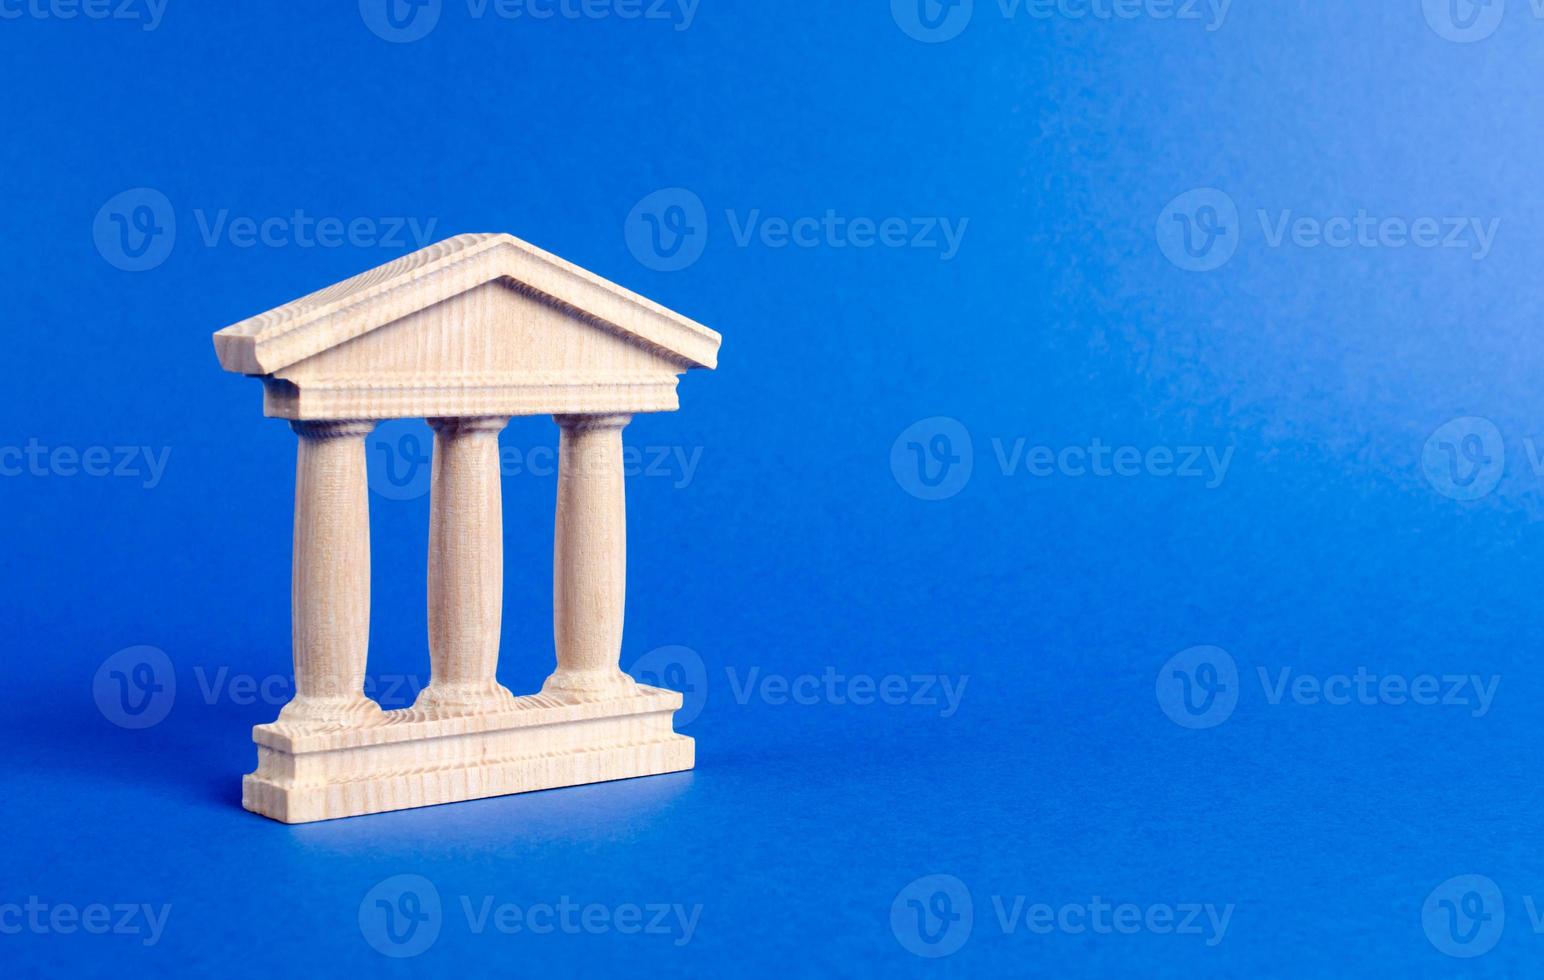 Building figurine with pillars in antique style. Concept of city administration, bank, university, court or library. Architectural monument in the old part of the city. Banking, education, government. photo